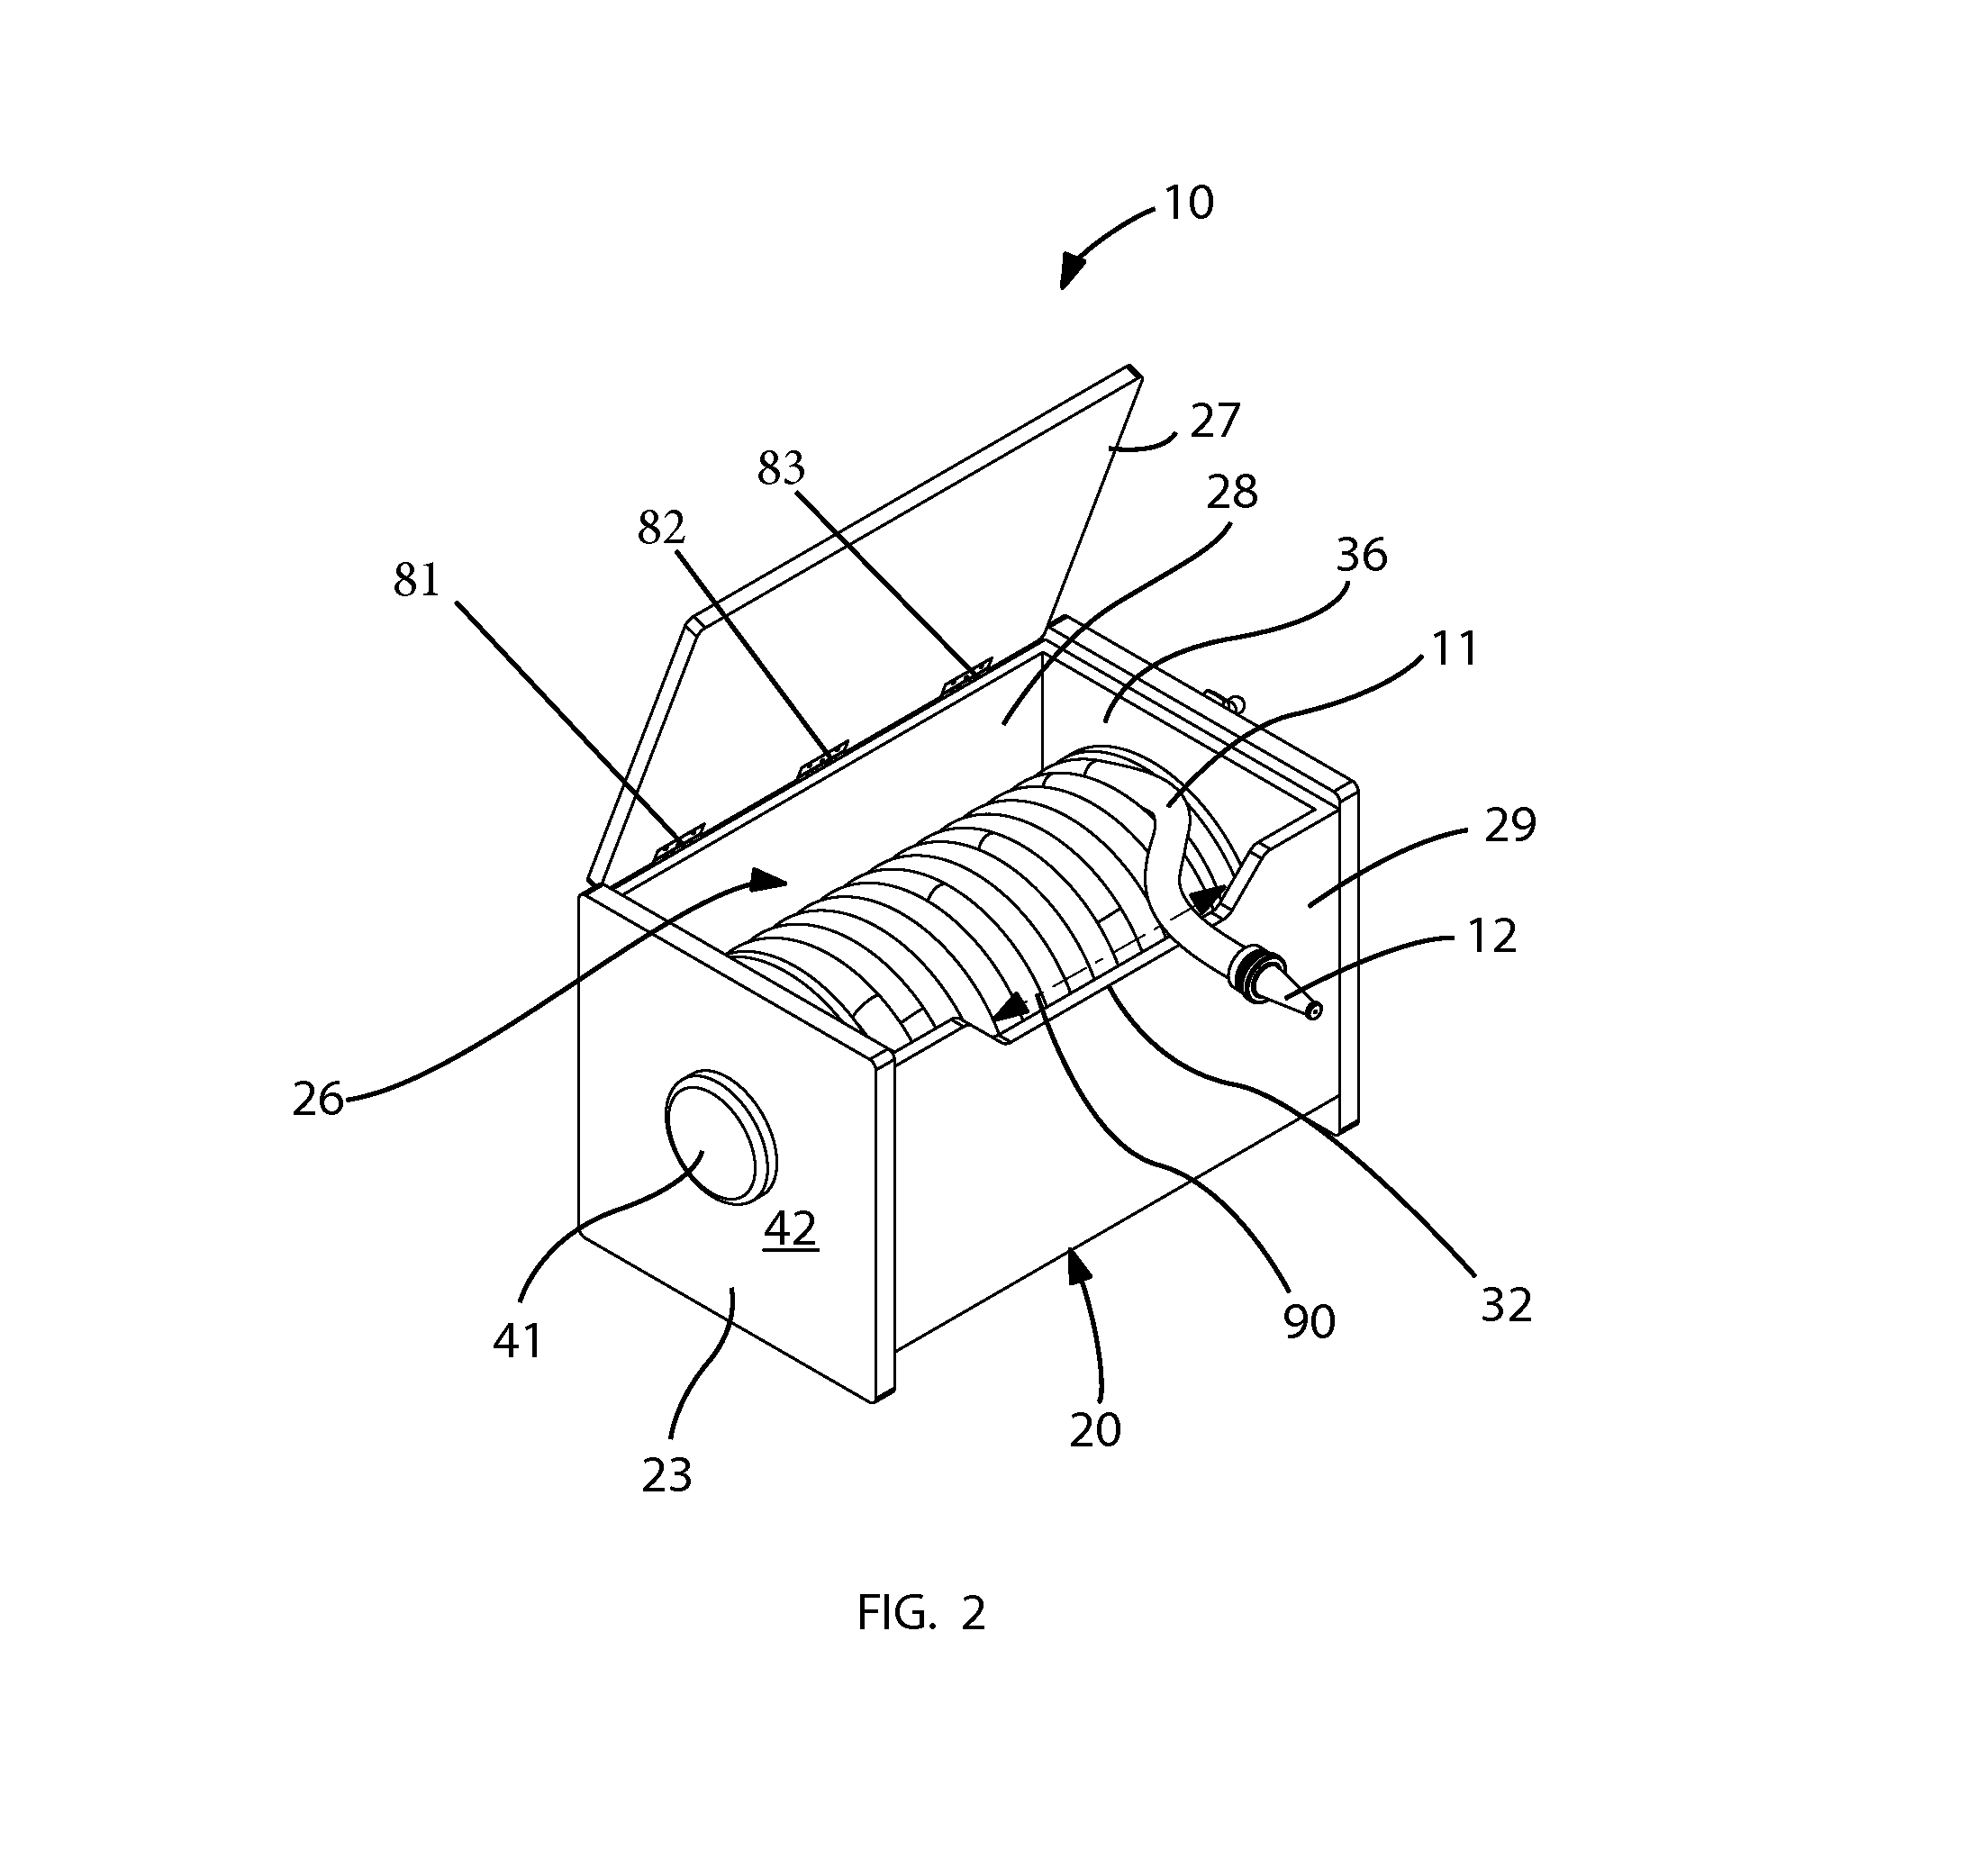 Indoor fire hydrant and associated method